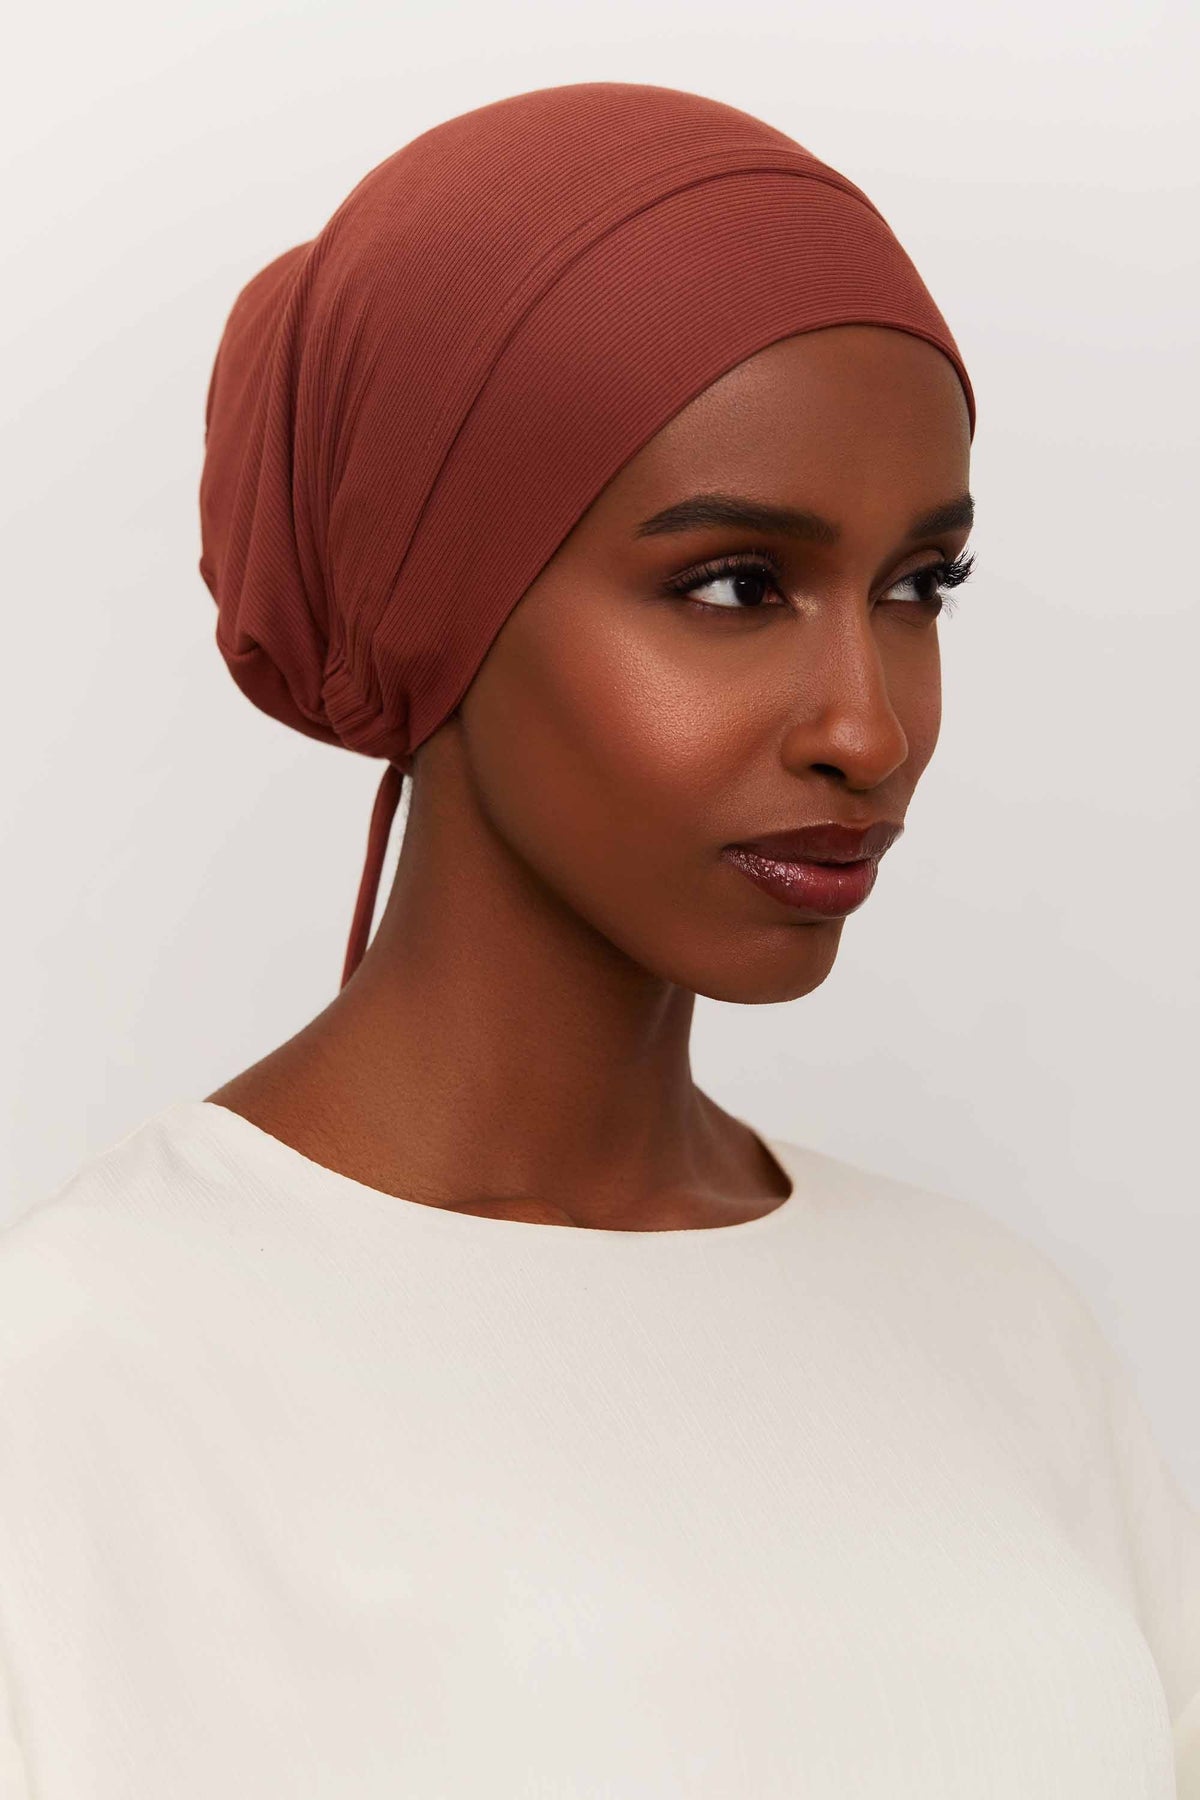 Ribbed Tie Back Undercap - Brown Out Extra Small Accessories Veiled 